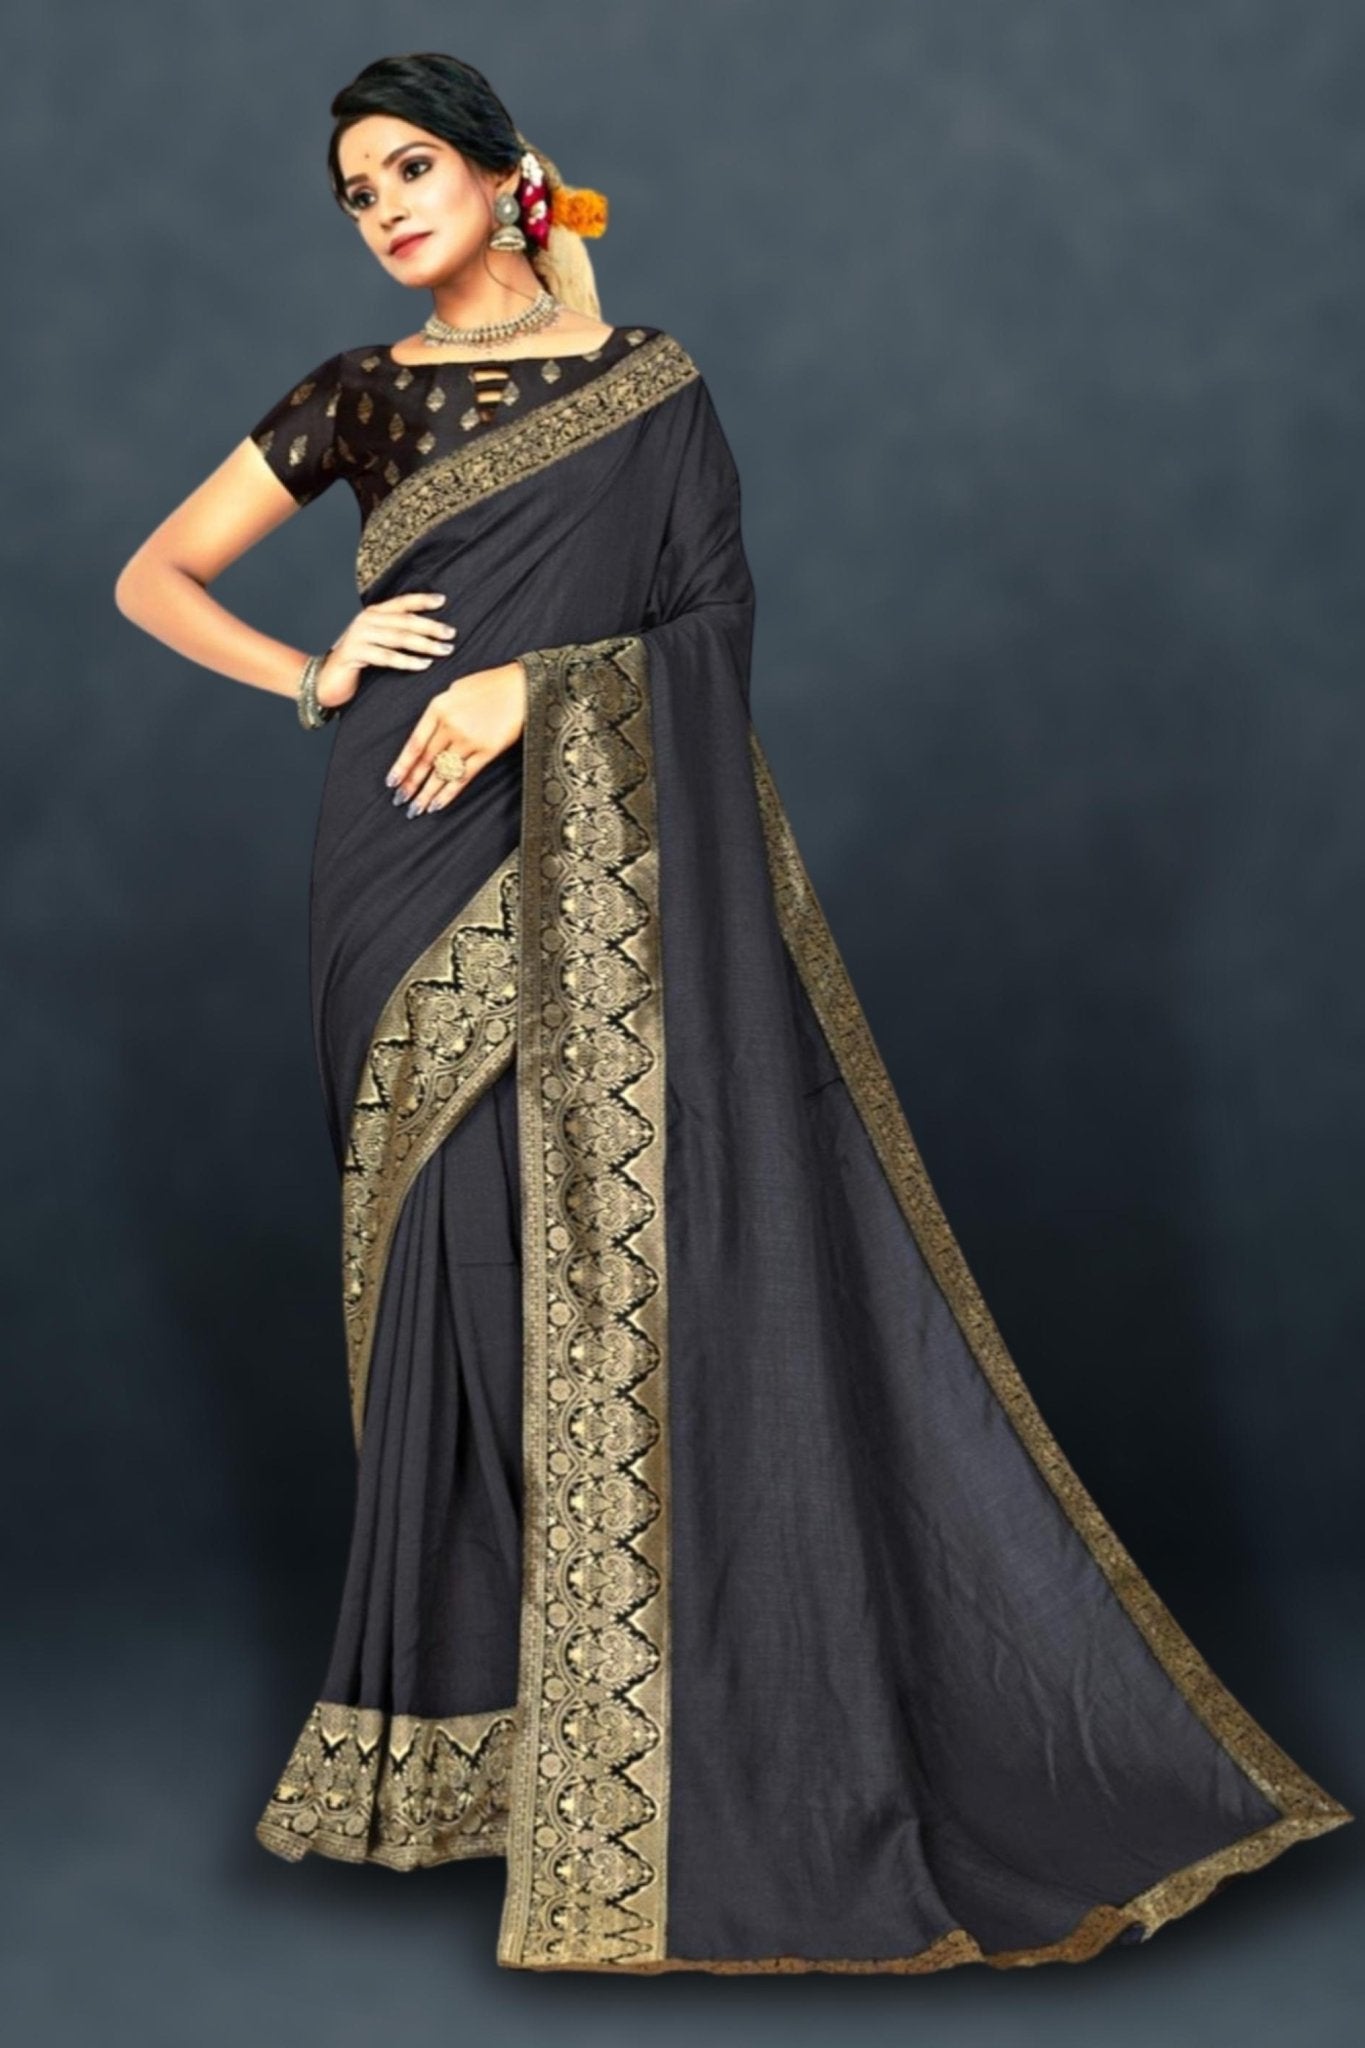 border & fall: There are 89 ways to wear a sari, and this website